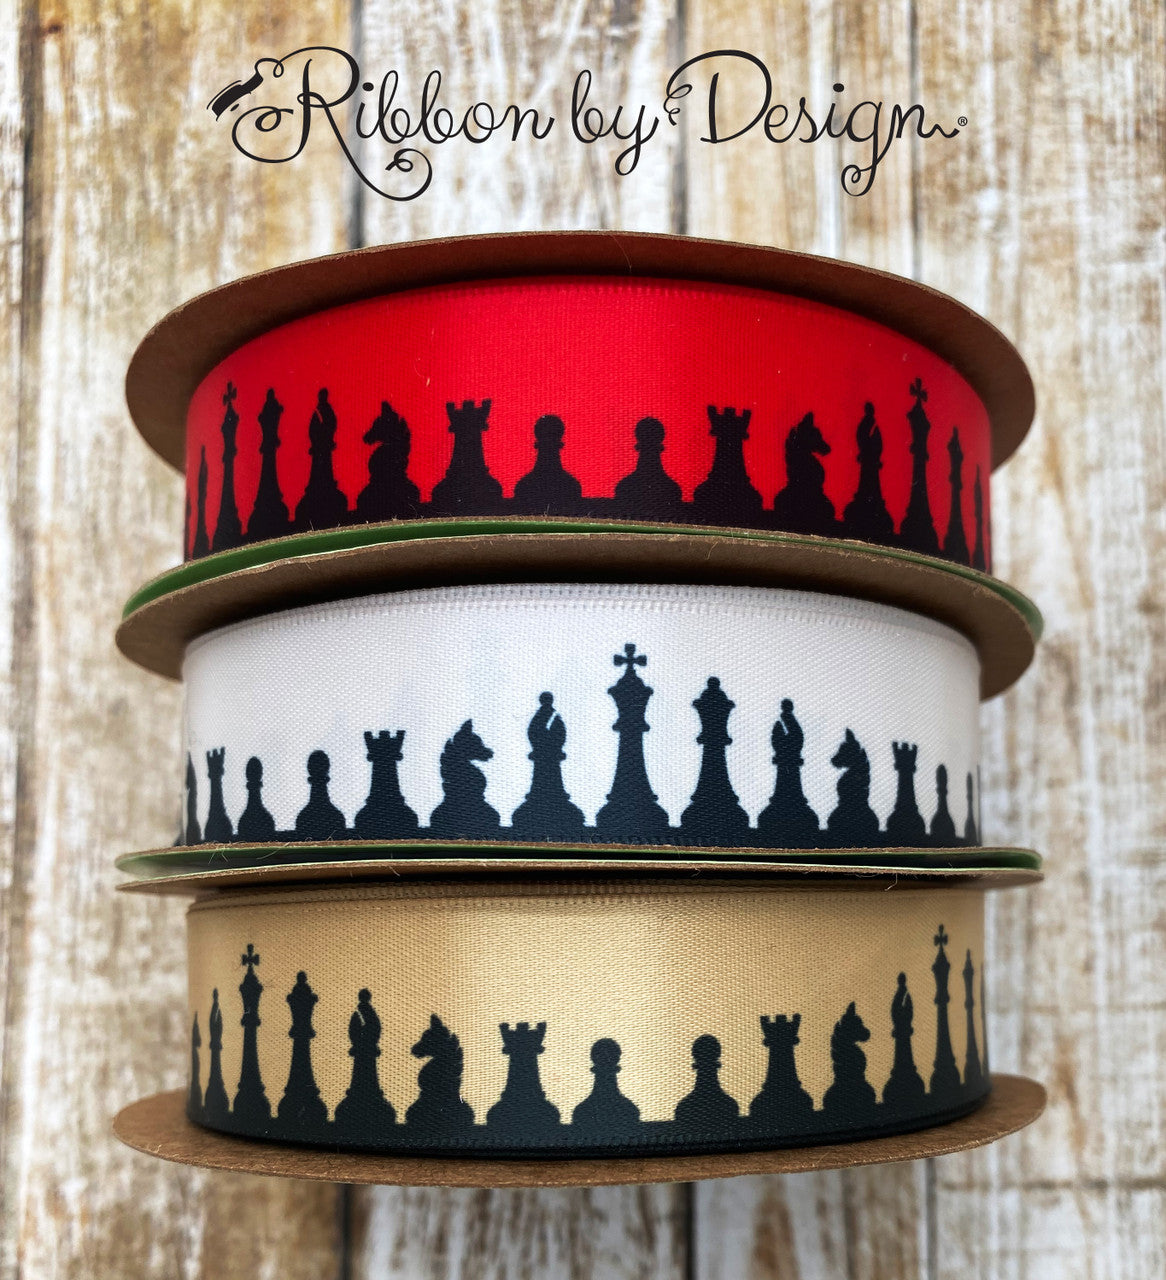 Our chess piece ribbon comes in three color ways ideal for so many gift wrap, craft and sewing projects